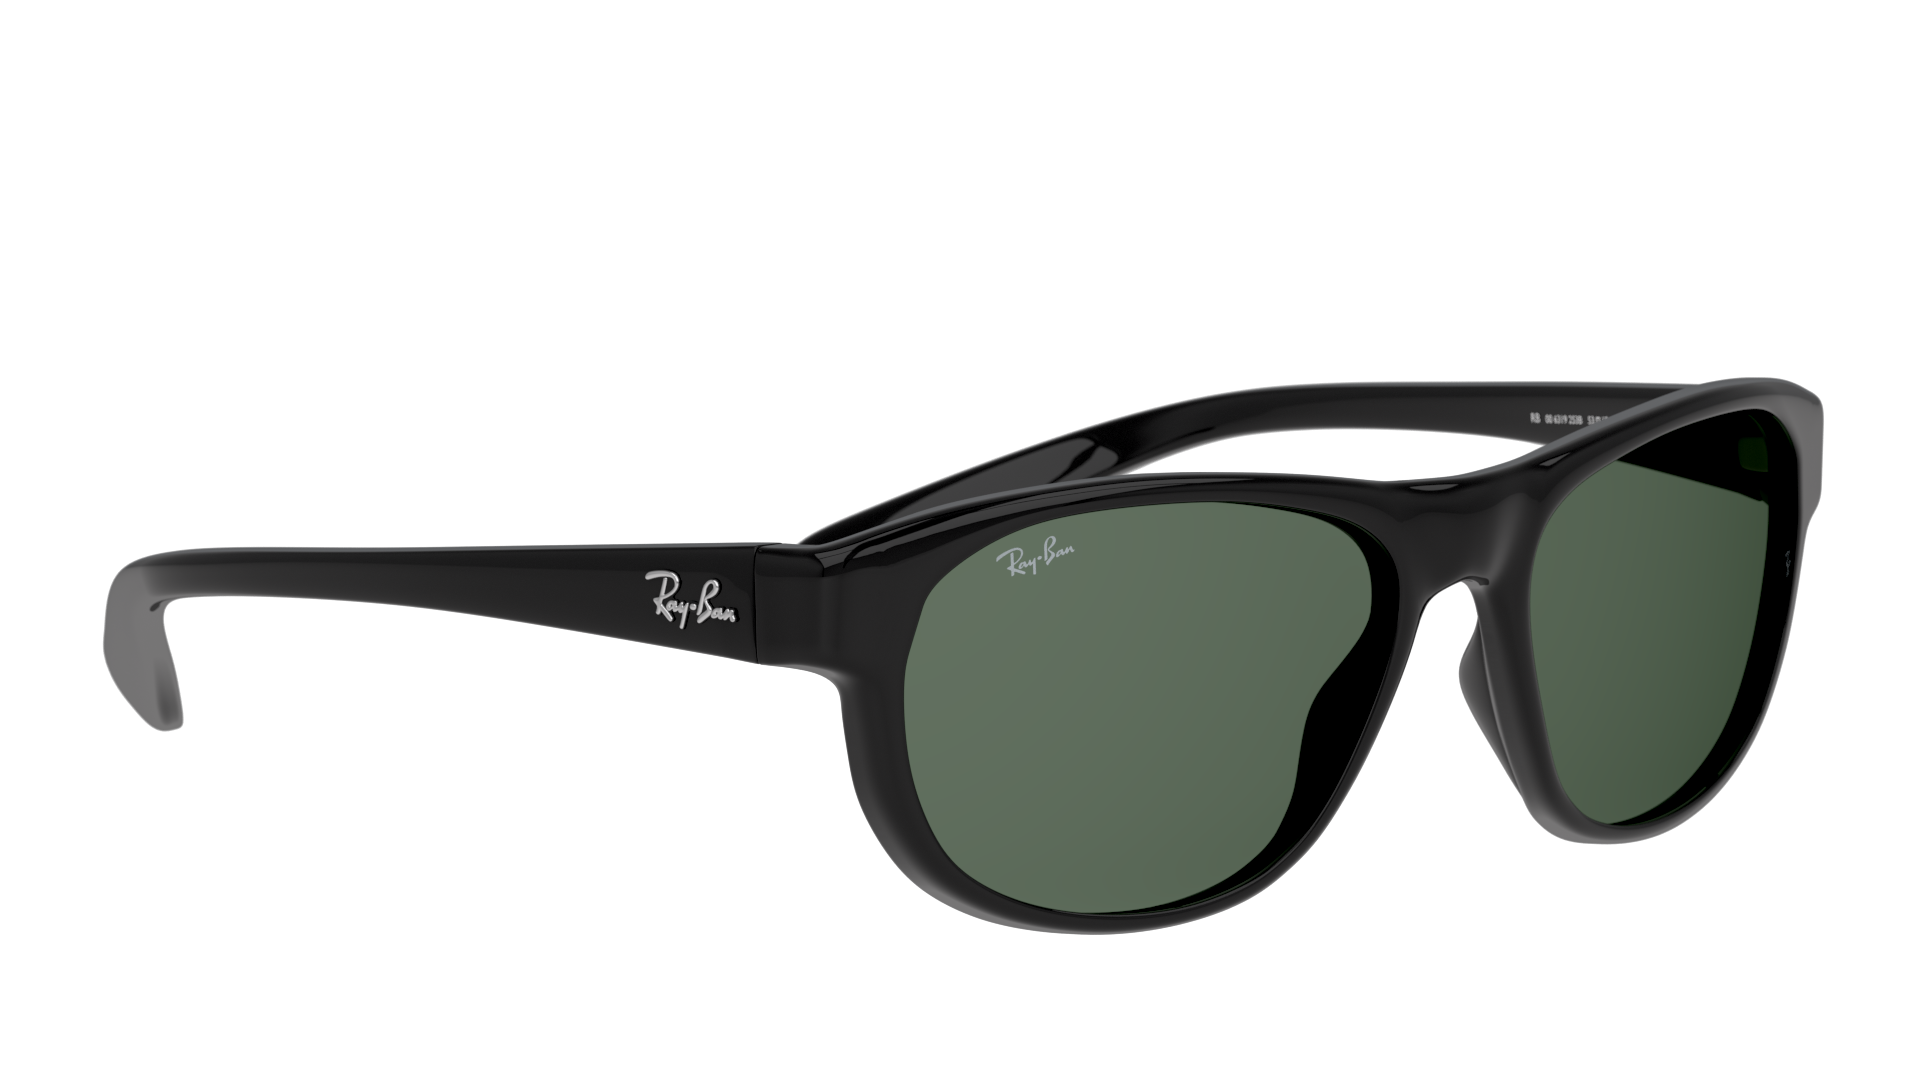 Angle_Right01 Ray-Ban 0RB4351 601/71 Verde / Nero